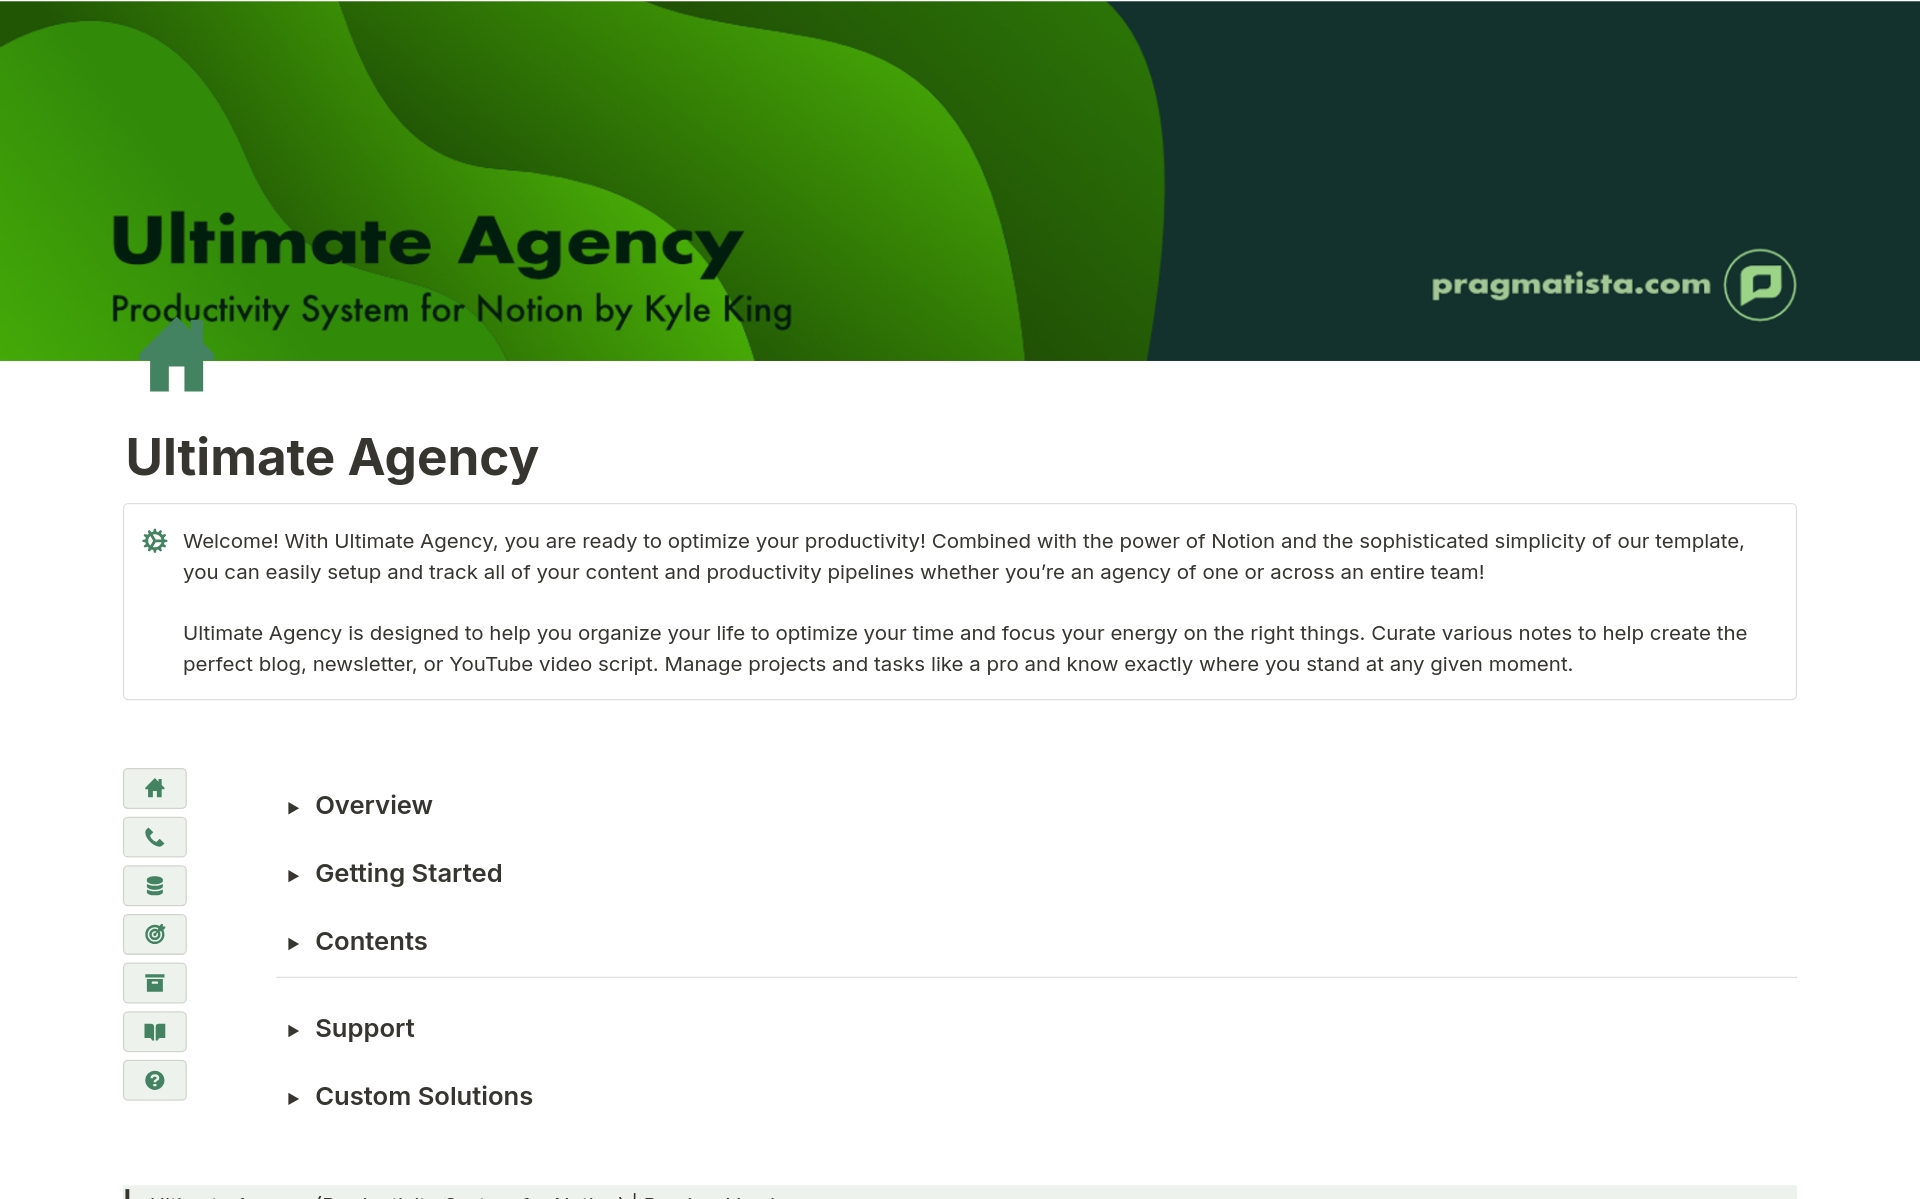 Ultimate Agency is designed to help you organize your life to optimize your time and focus your energy on the right things. Curate various notes to help create the perfect blog, newsletter, or YouTube video script. Manage projects and tasks like a pro and know exactly where you s